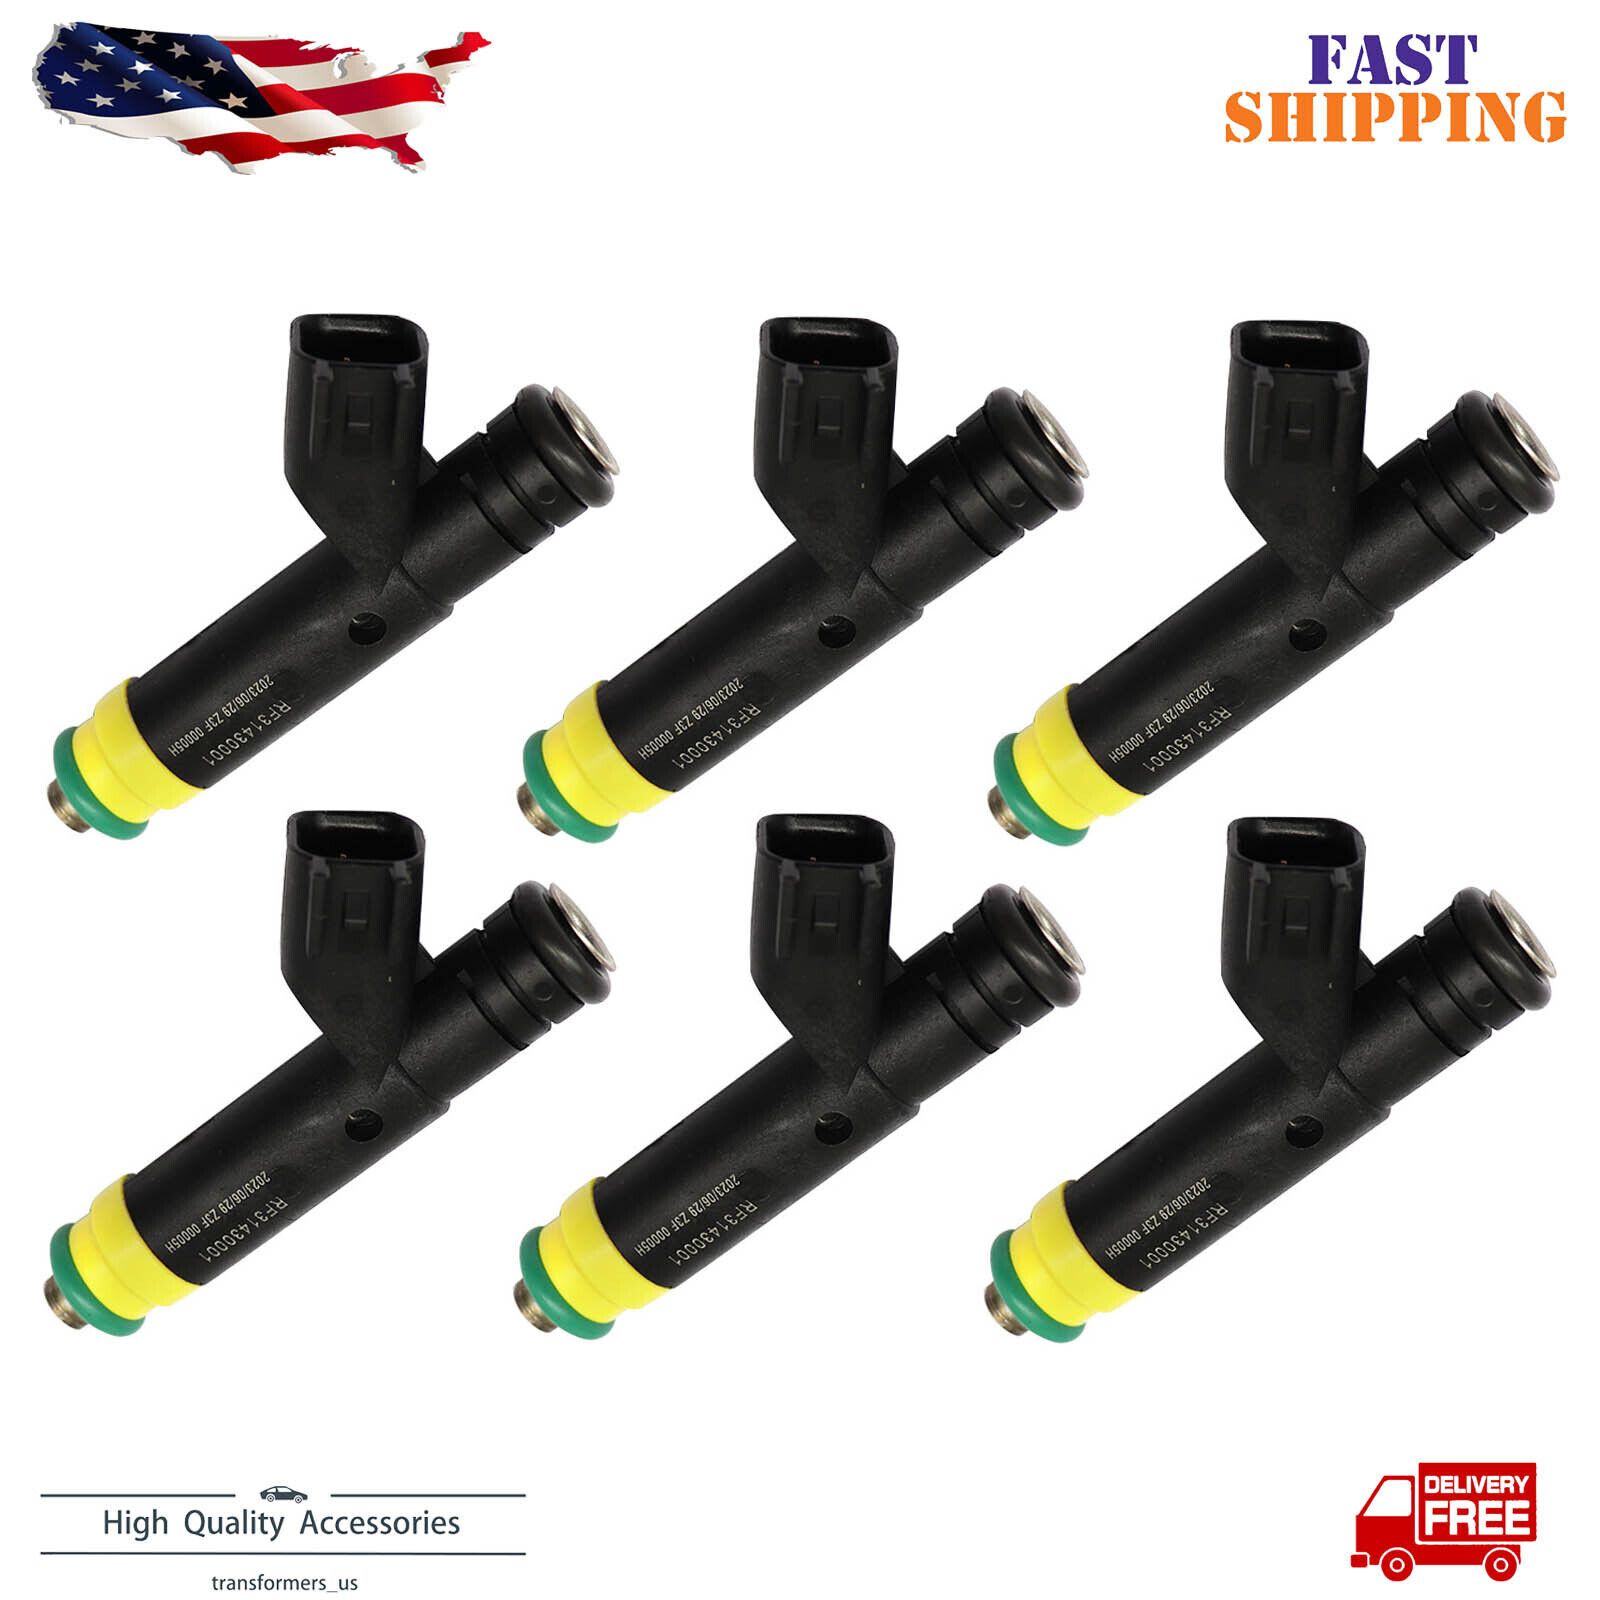 Set of 6 for Pickup Ford Ranger Mazda B3000 Truck 01-07 Fuel Injectors Gas New